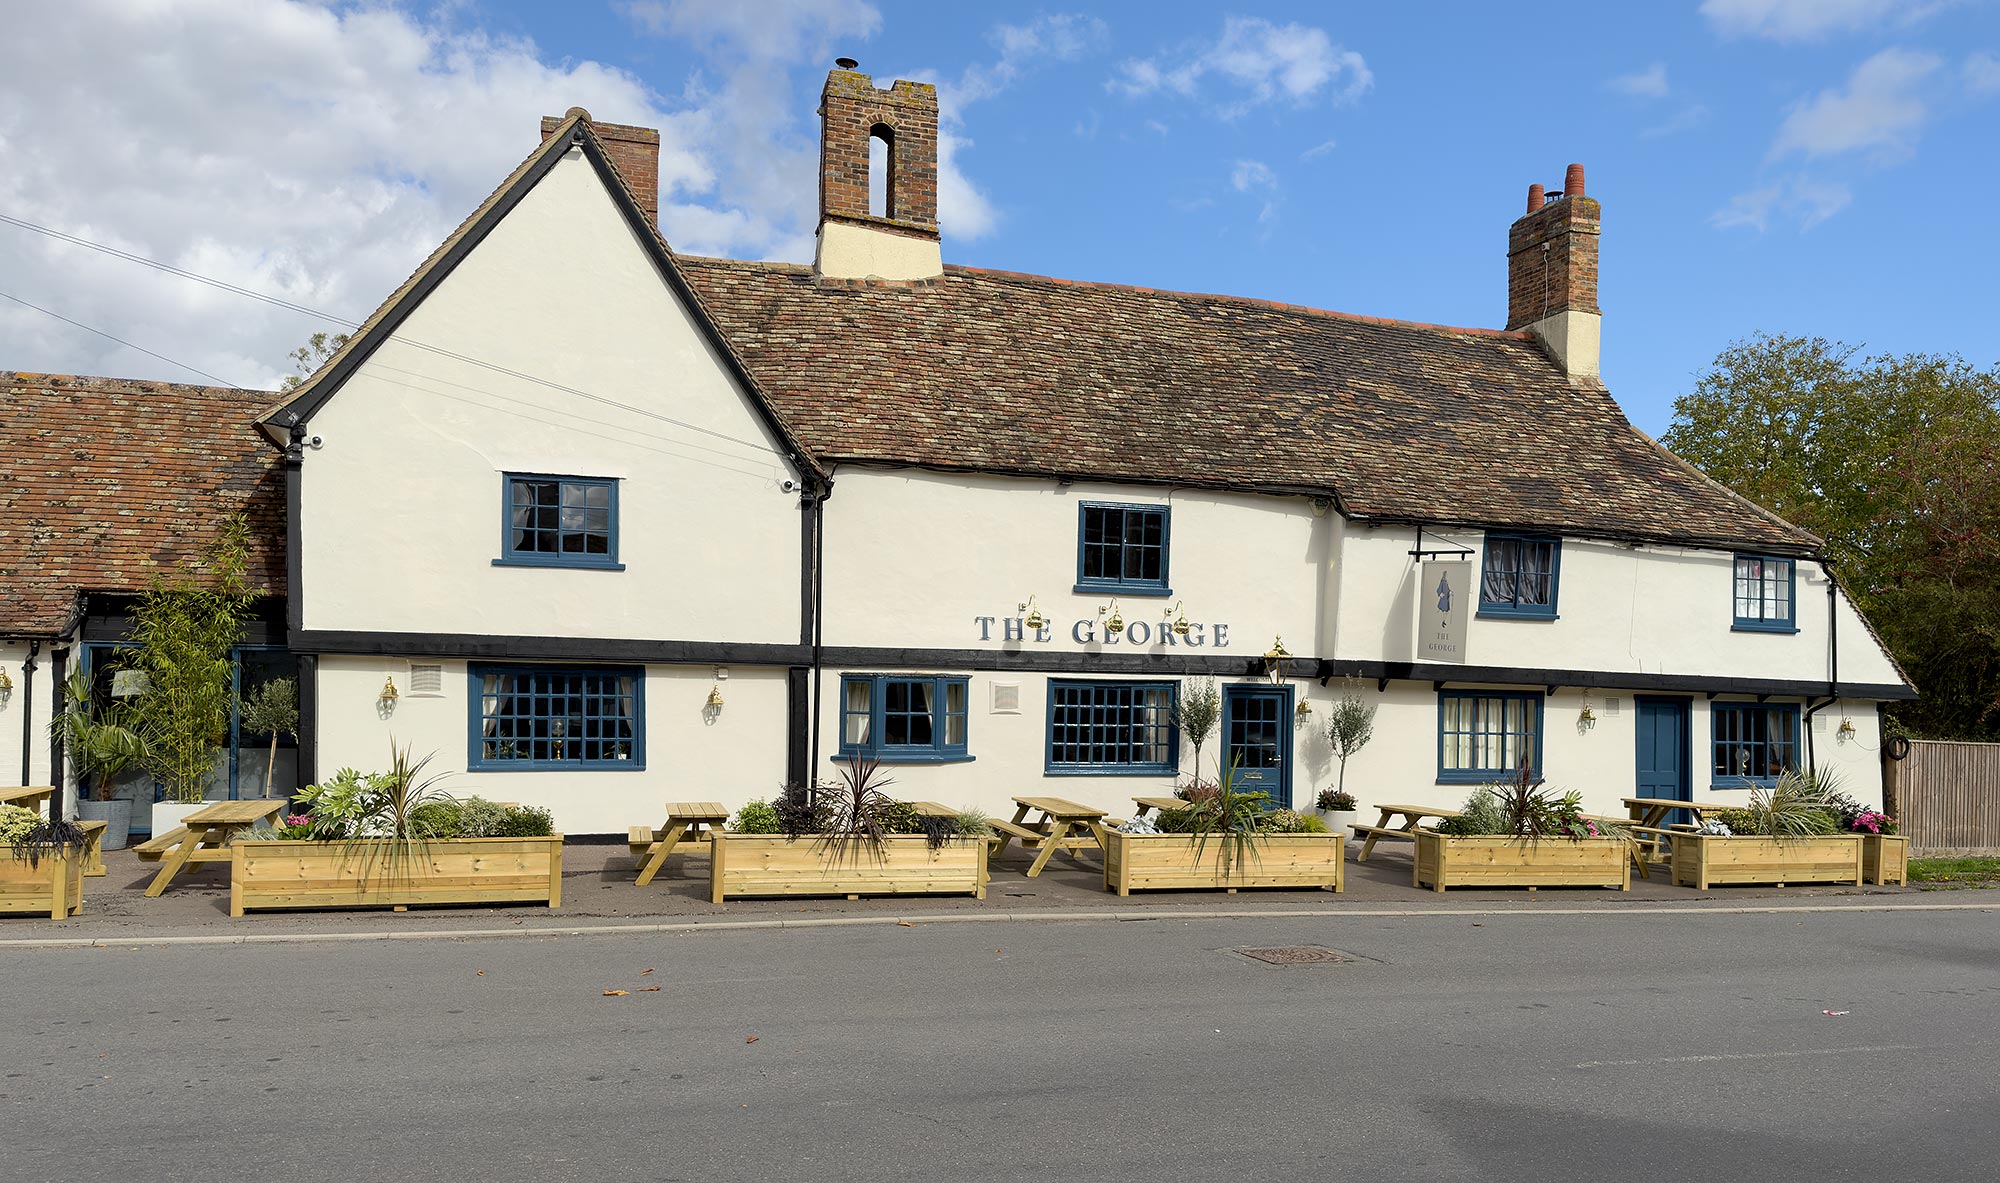 The George in Spaldwick